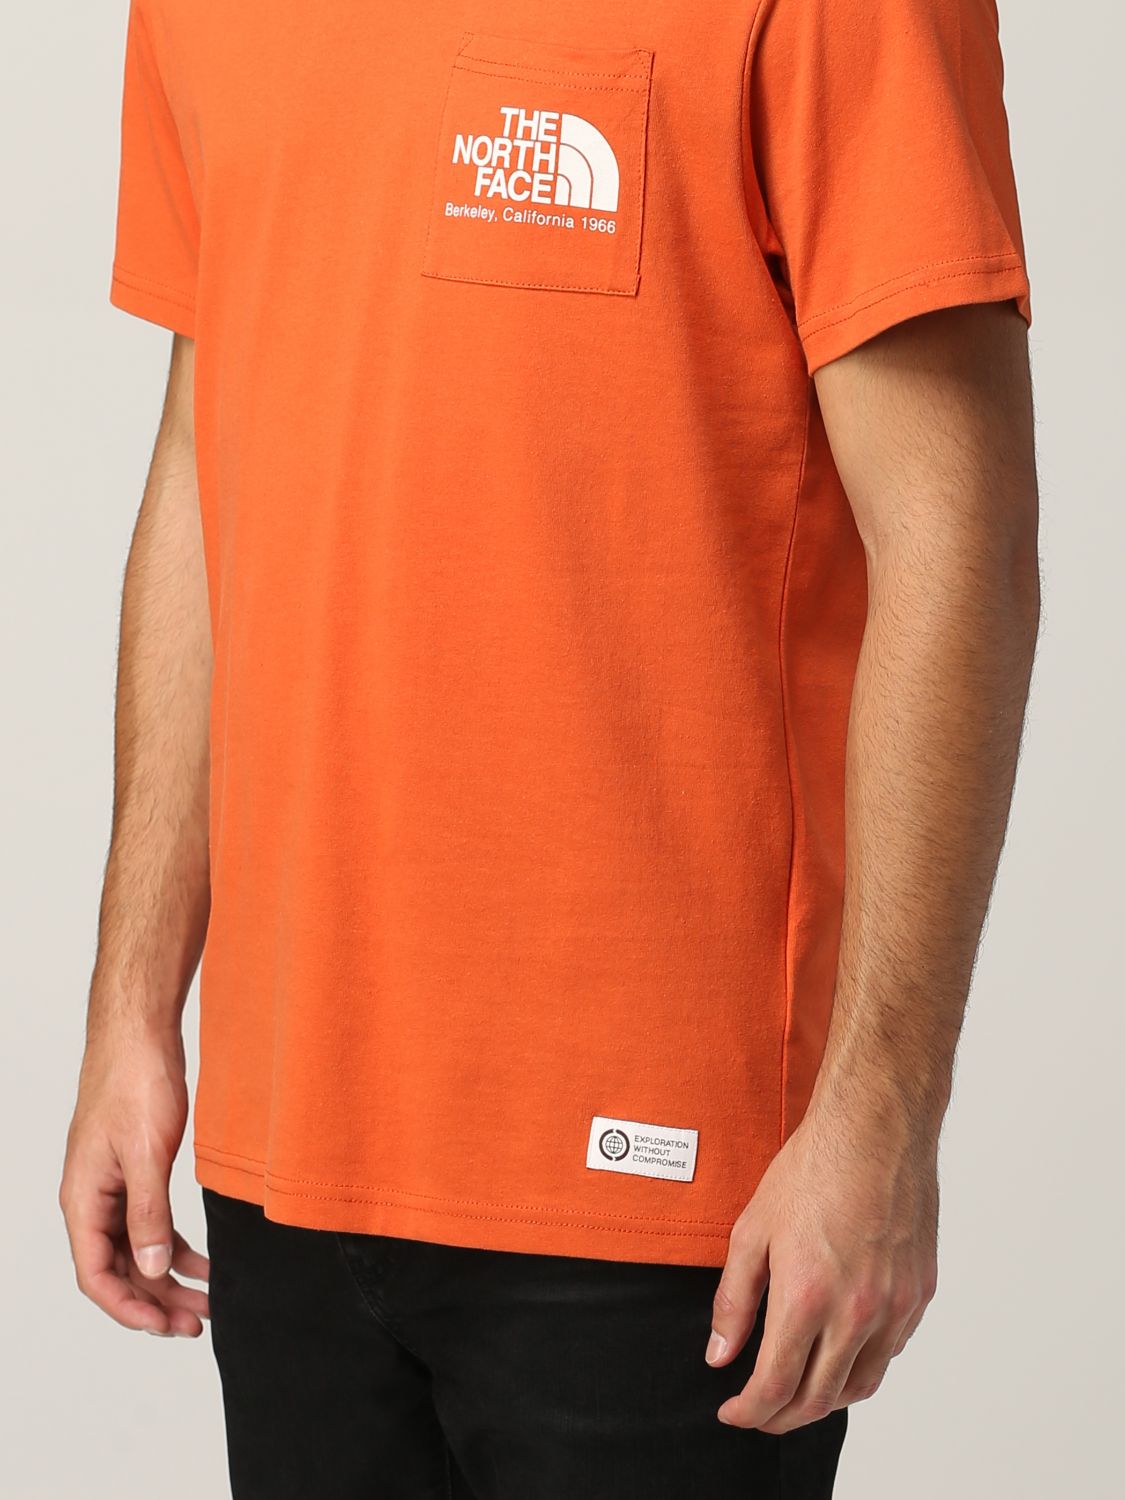 the-north-face-t-shirt-for-man-orange-the-north-face-t-shirt